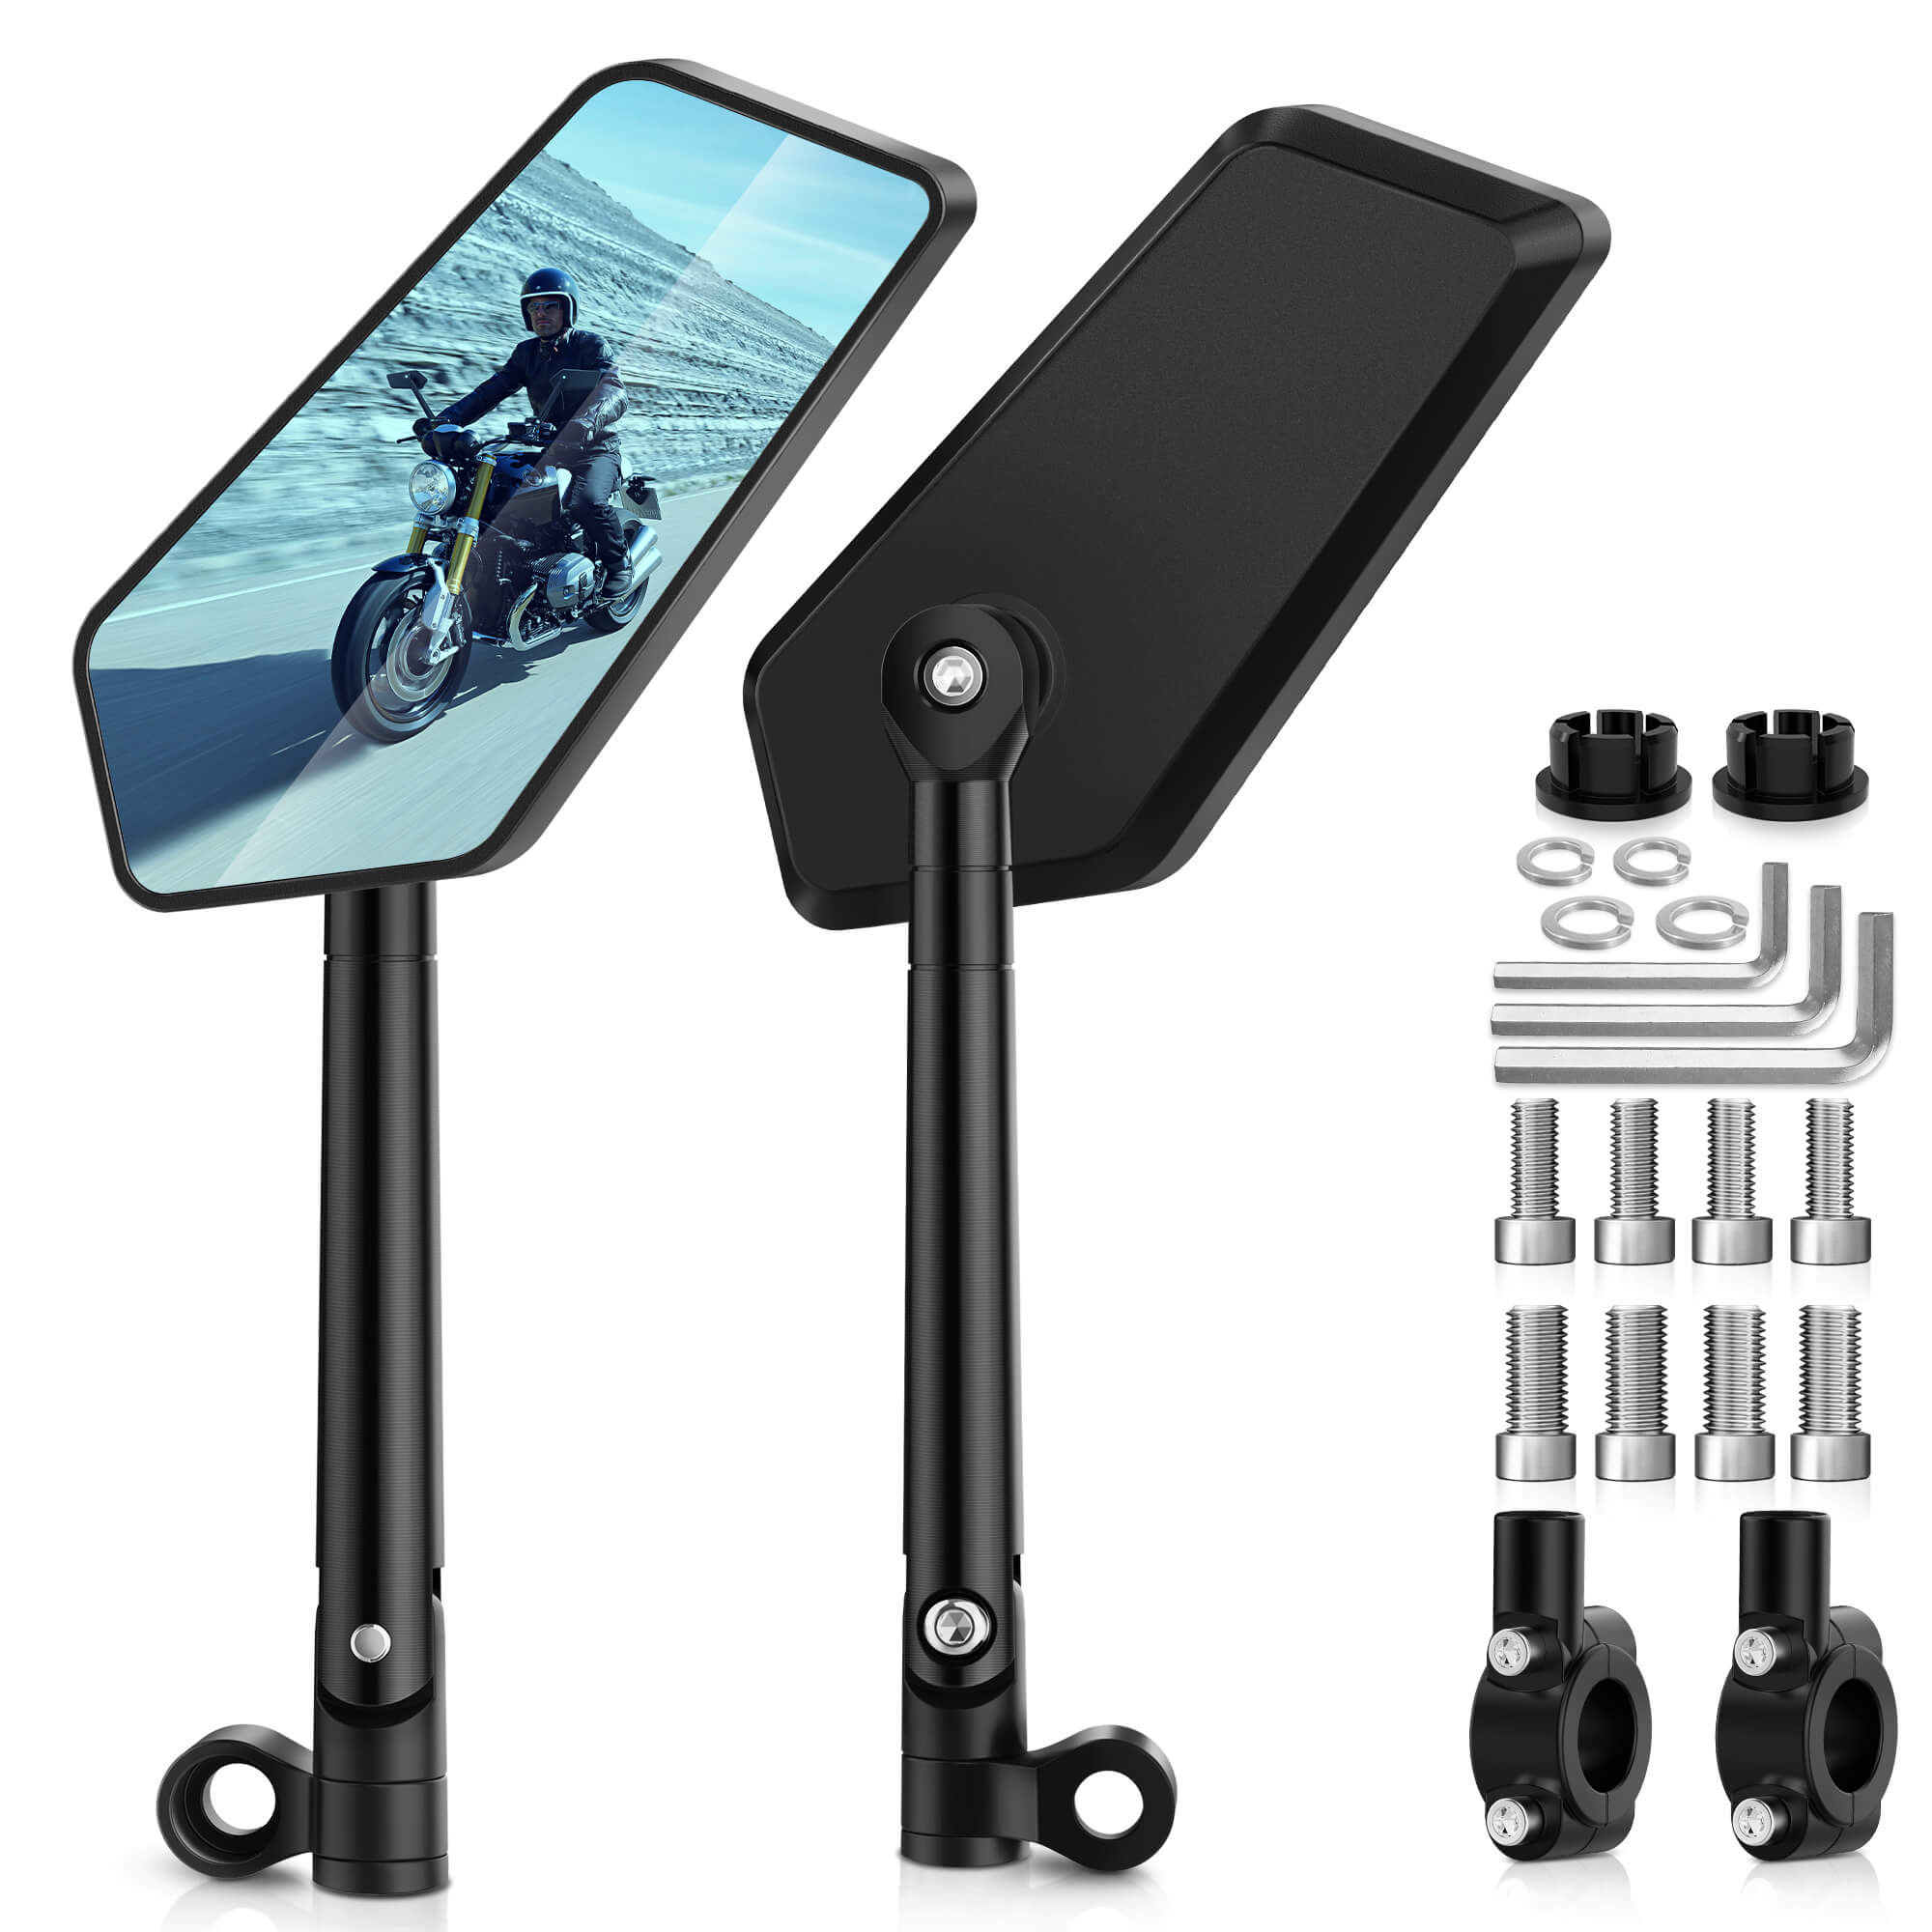 Scooter/Motorcycle - Mirror Mount